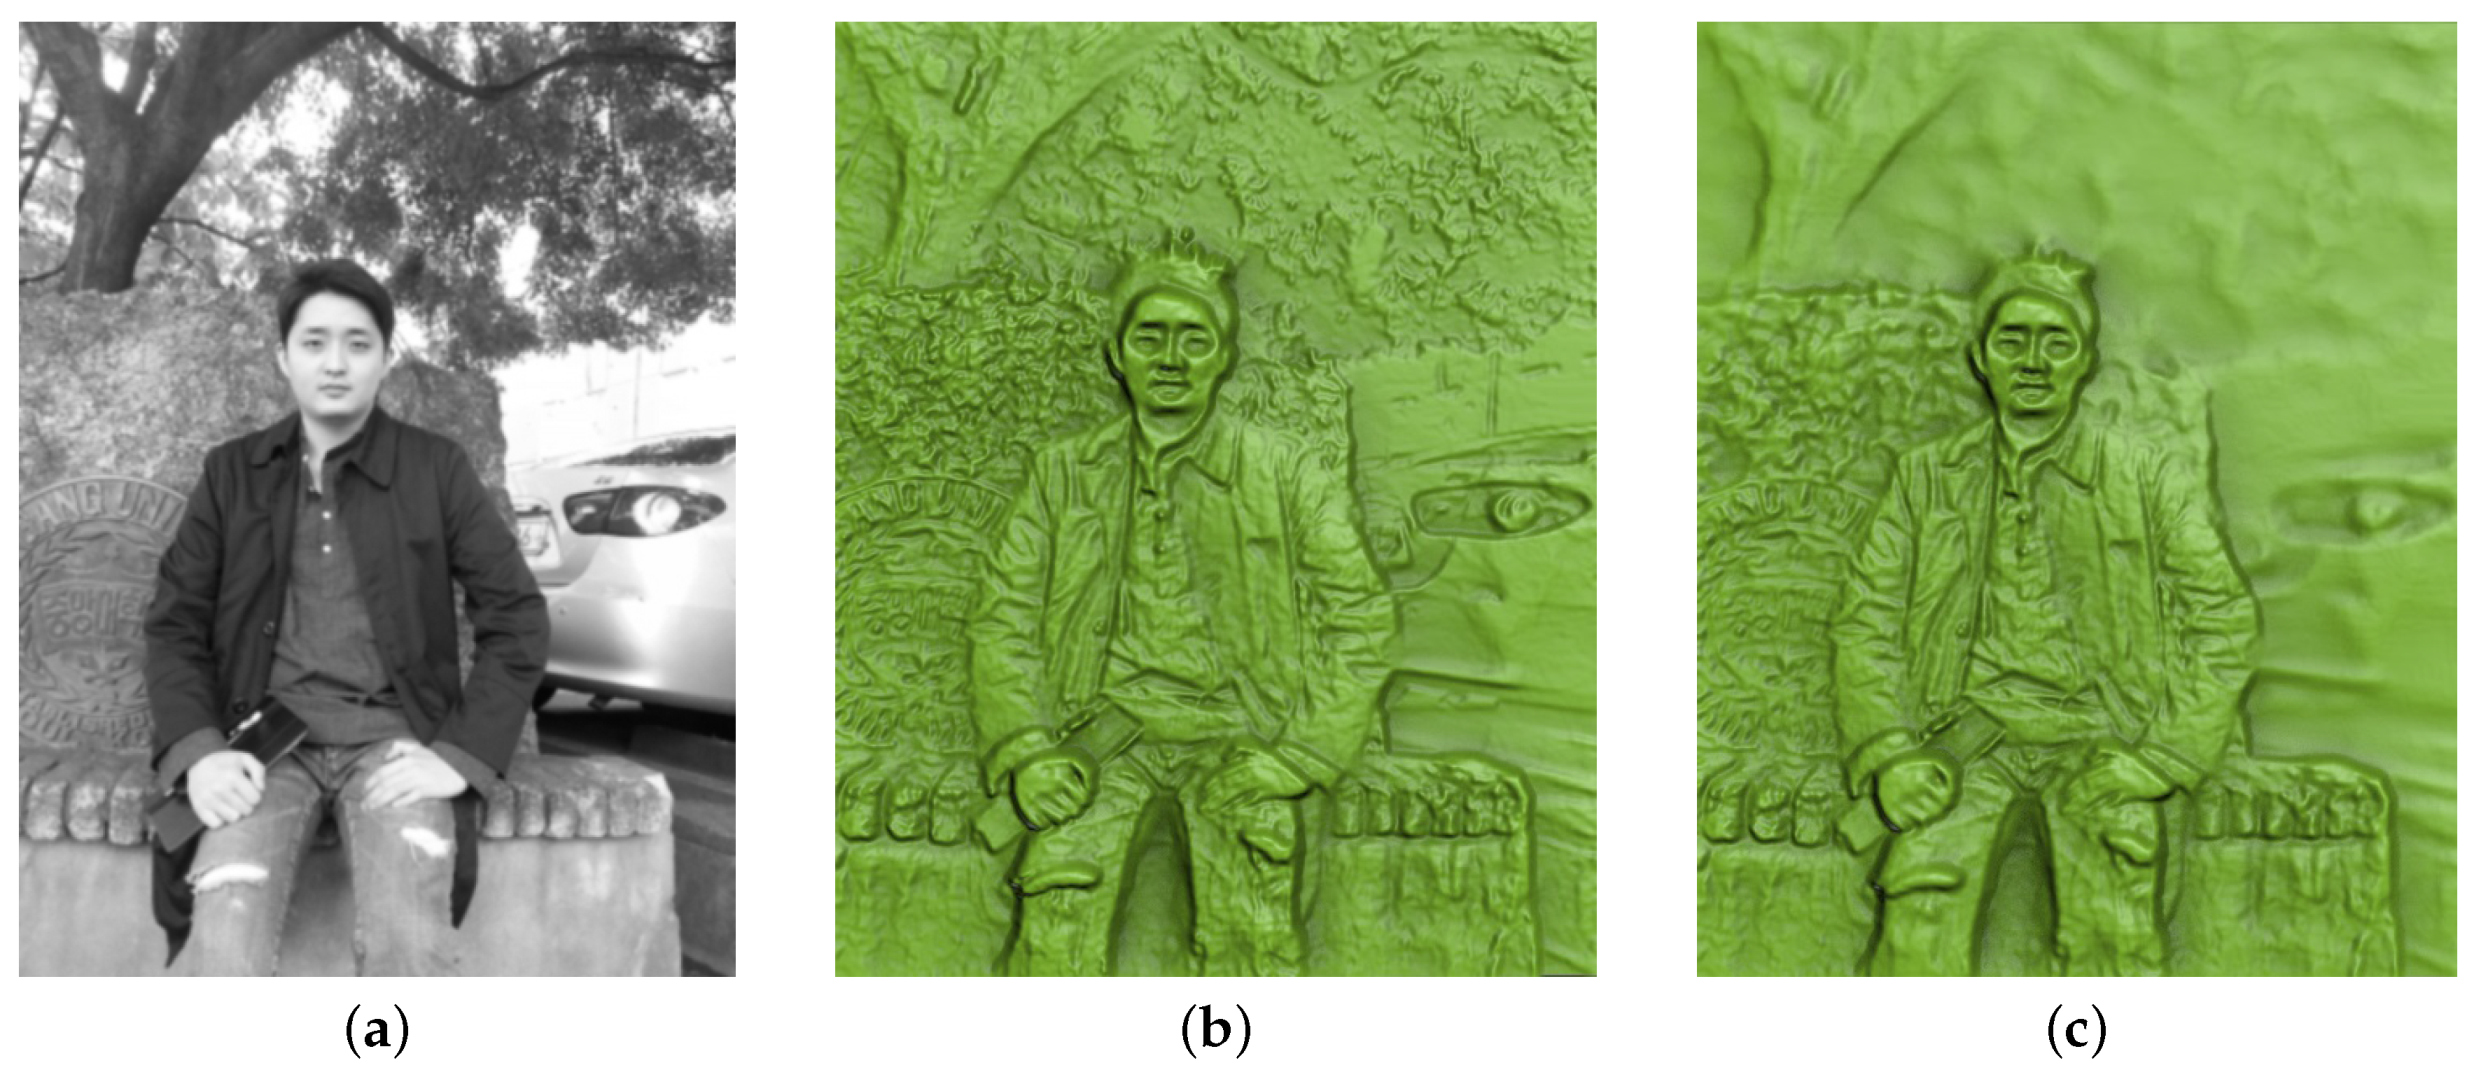 Sensors | Free Full-Text | Ubiquitous Creation of Bas-Relief Surfaces with  Depth-of-Field Effects Using Smartphones